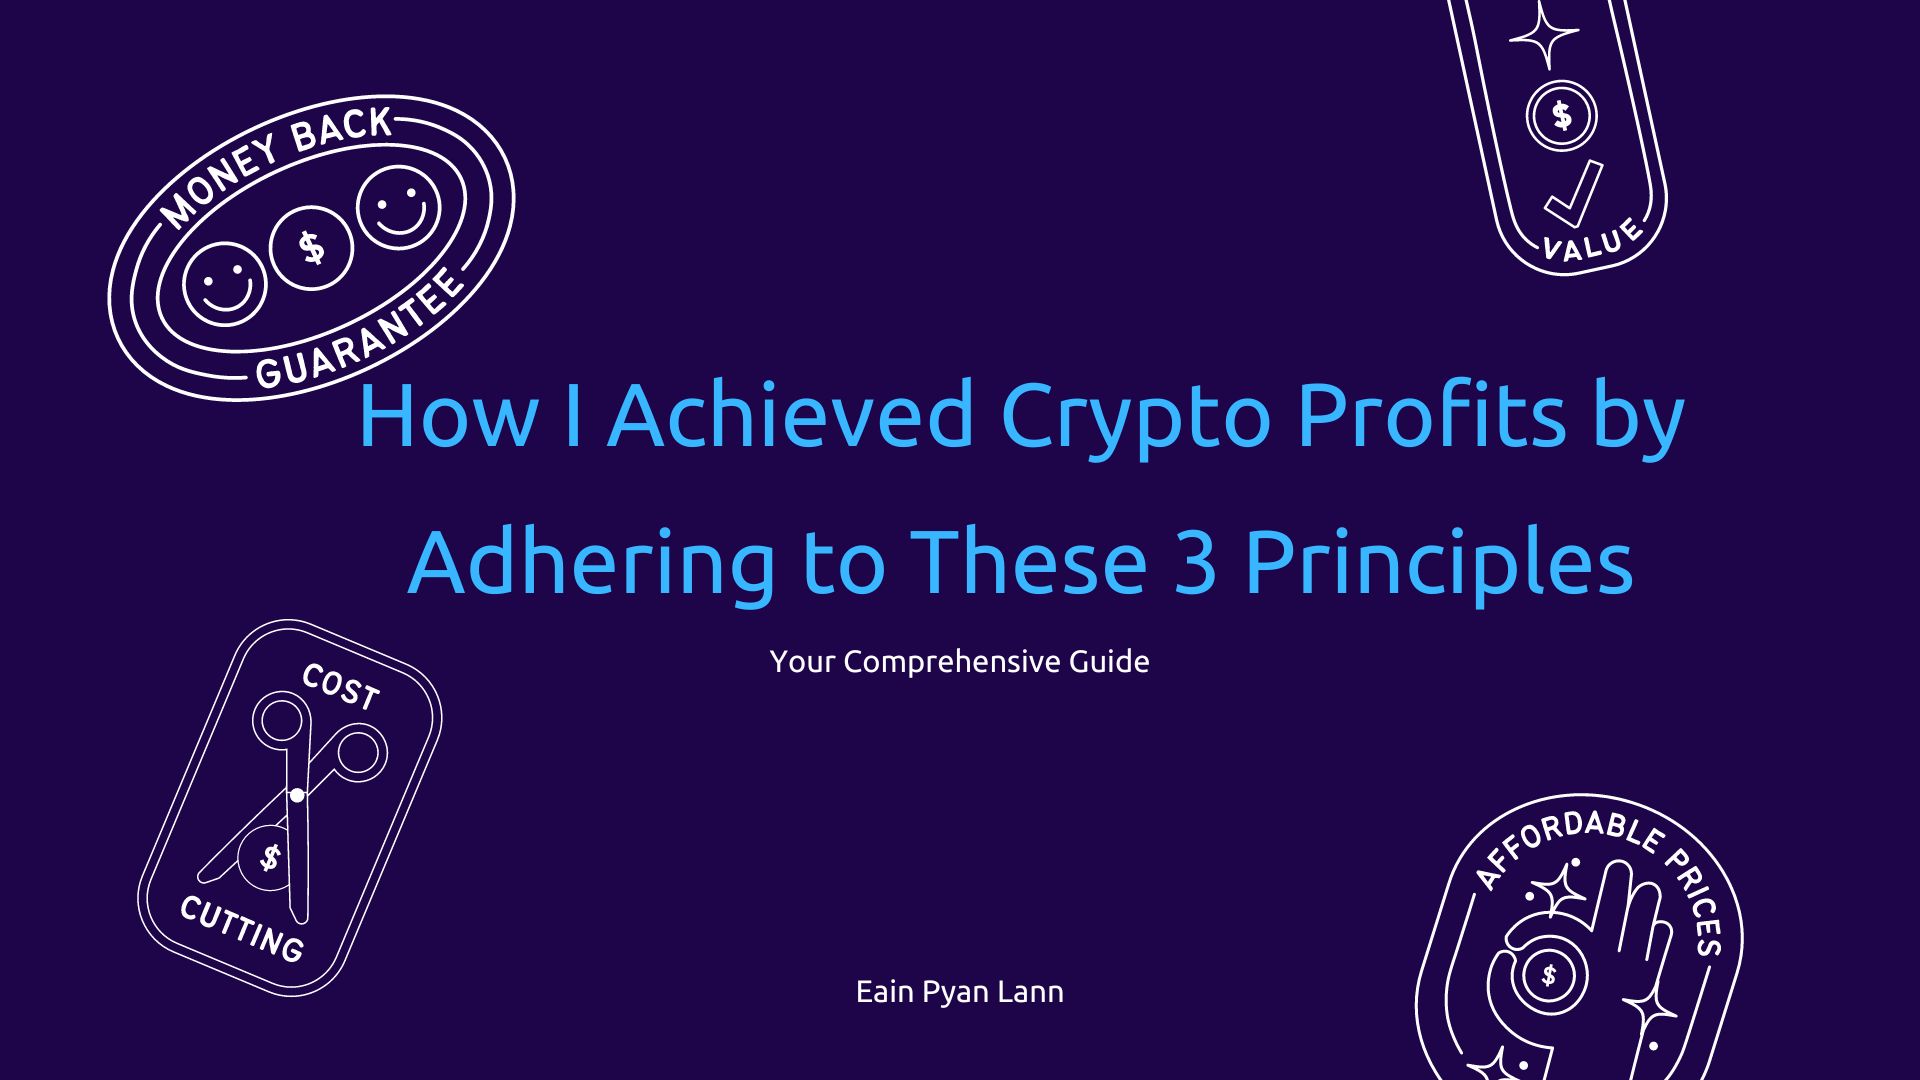 How I Achieved Crypto Profits by Adhering to These 3 Principles